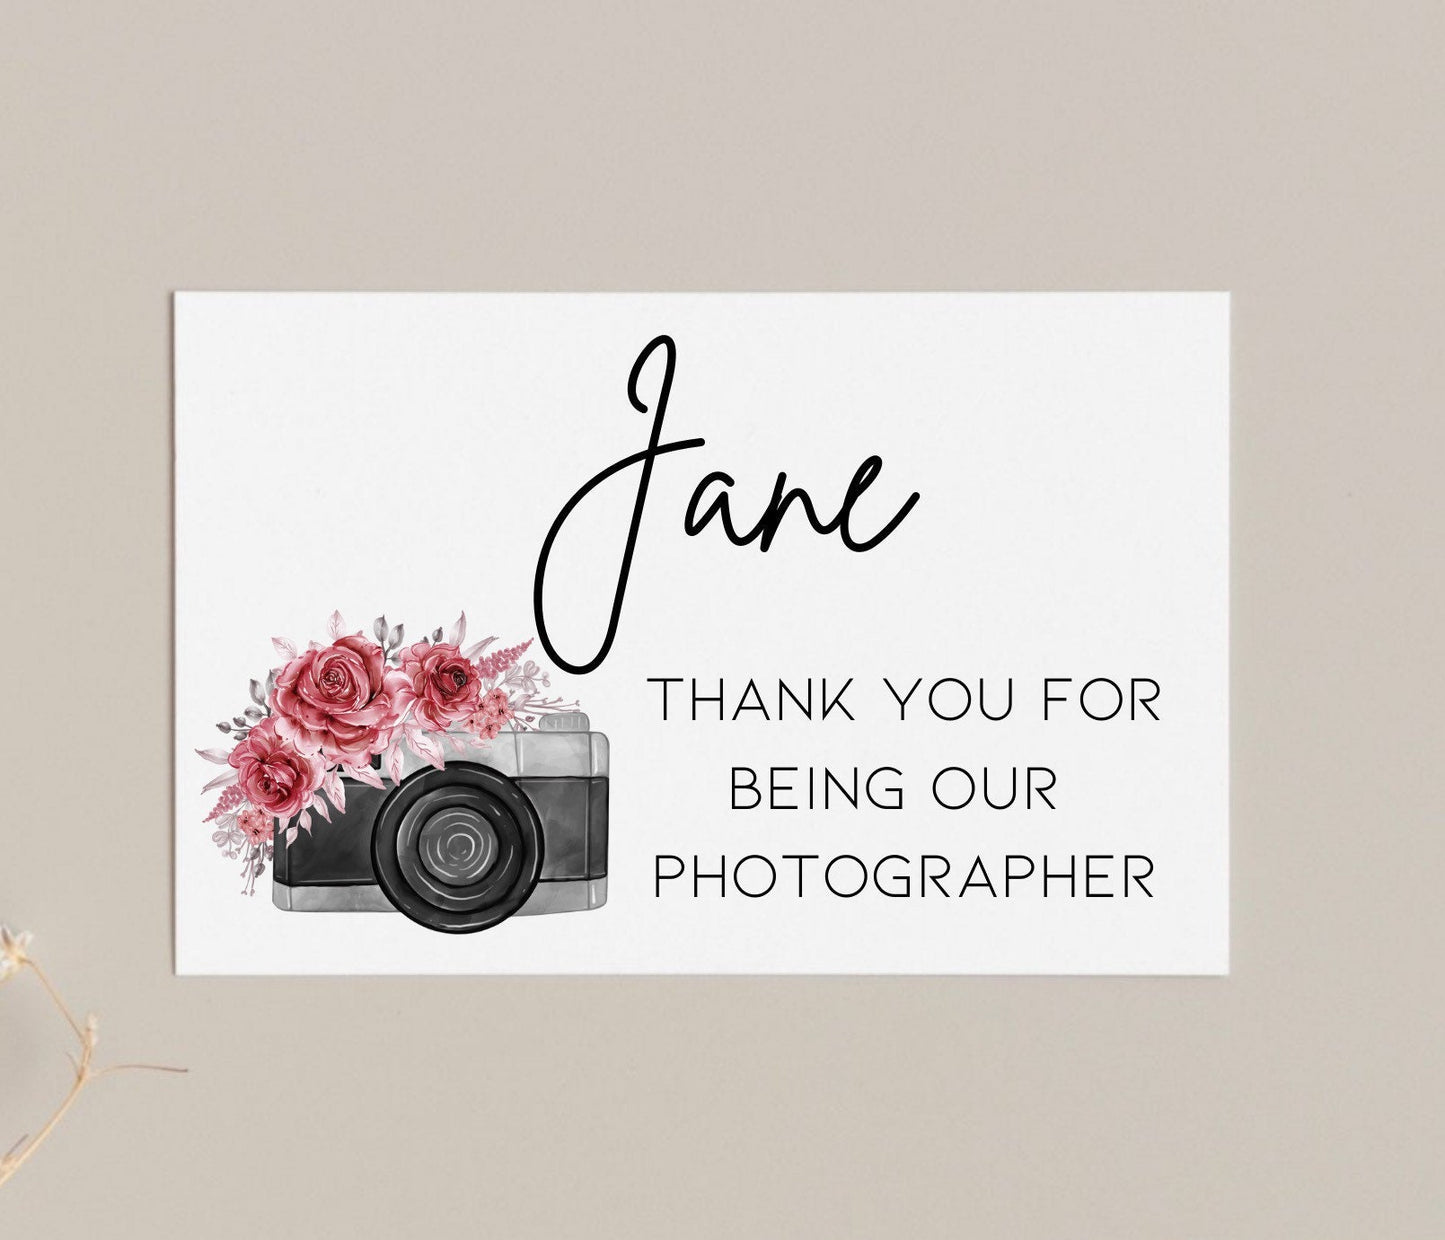 Thank you for being our photographer, personalised wedding photographer card, thanks for wedding day photos, flower camera